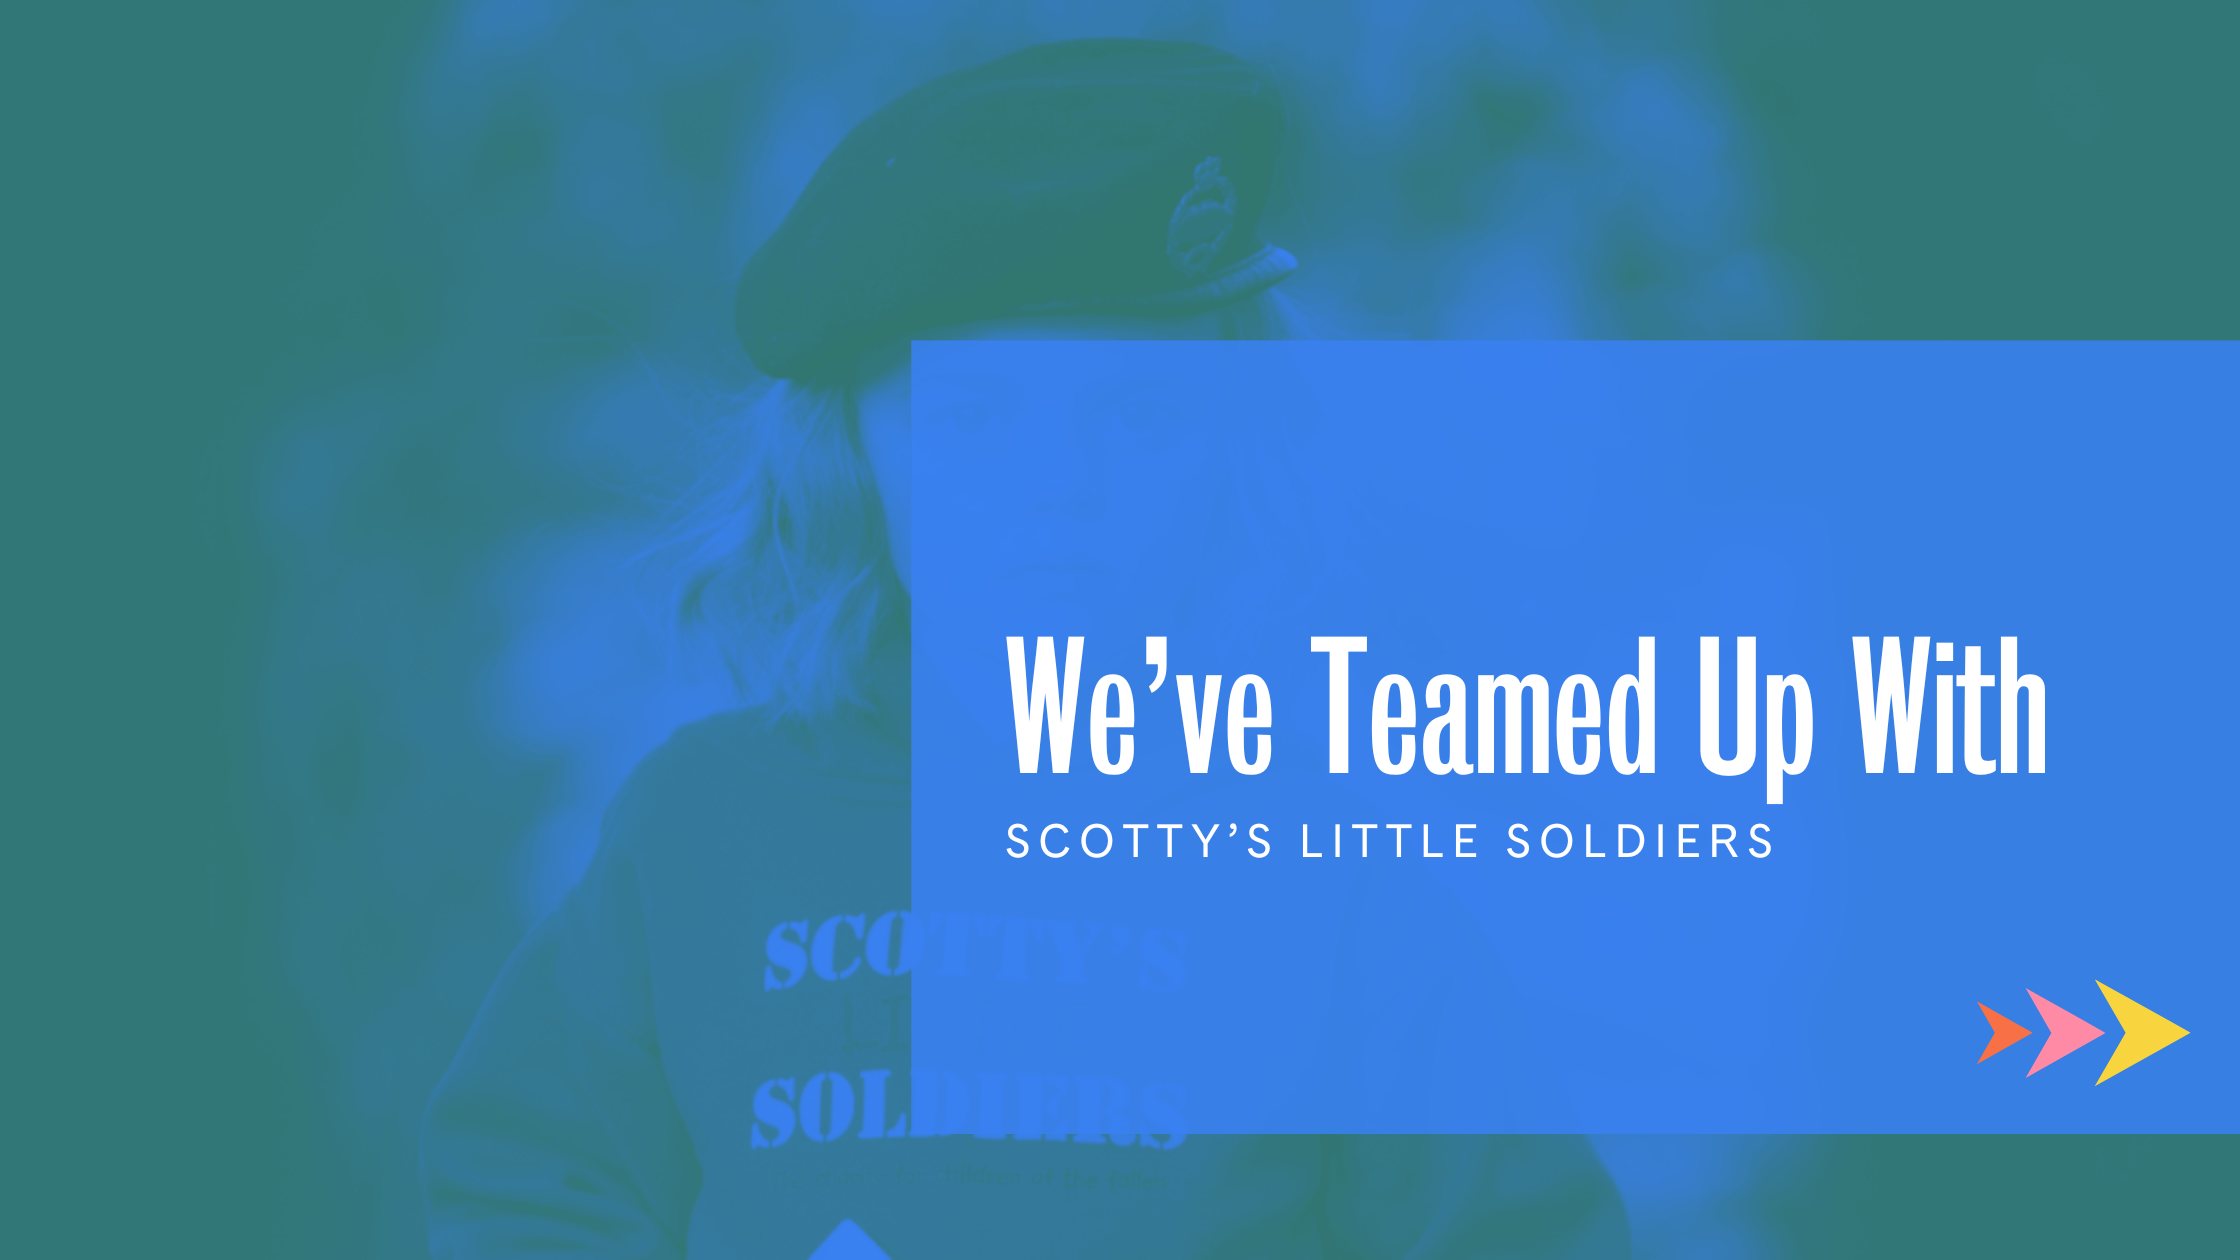 We’ve teamed up with Scotty’s Little Soldiers!